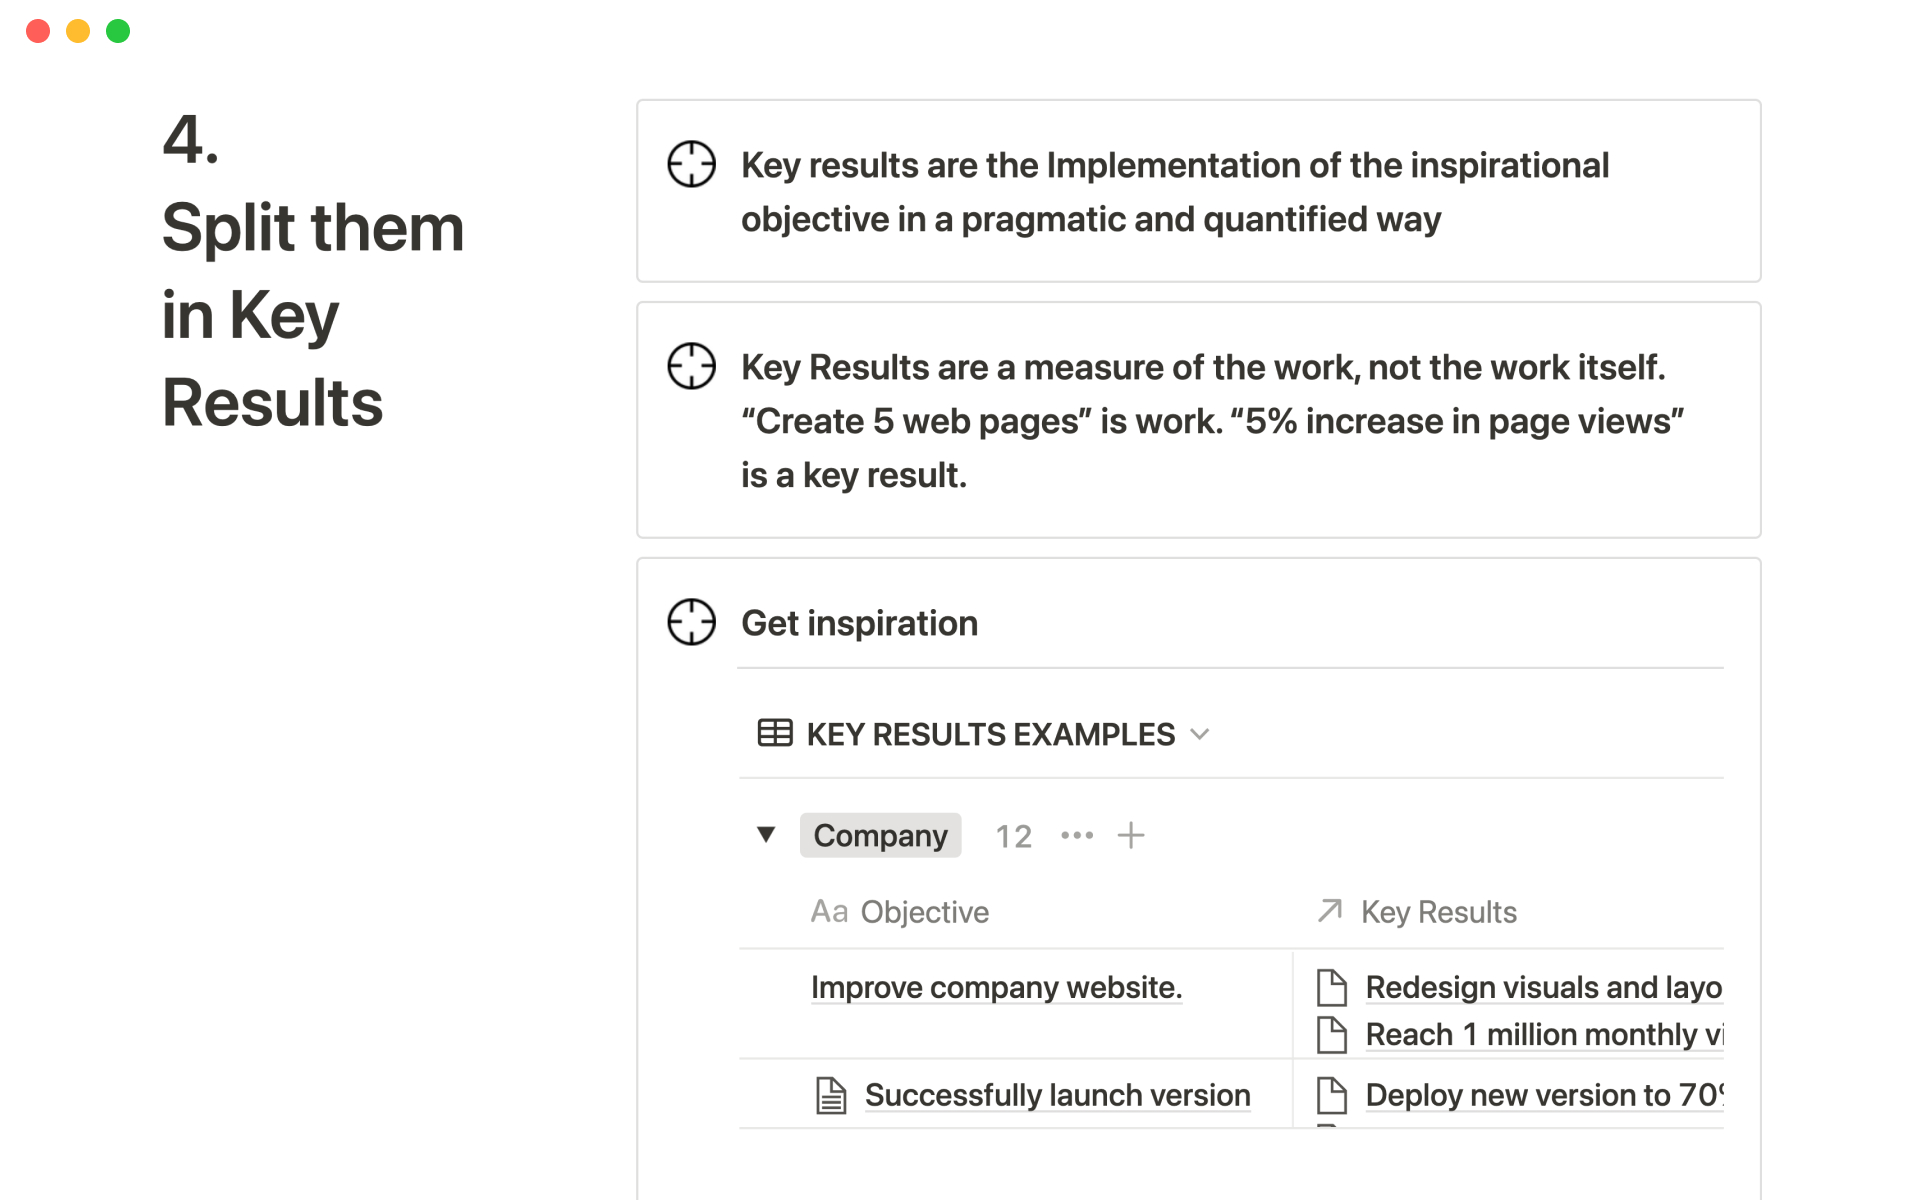 Manage your OKR and learn about the OKR system with +200 examples and tips